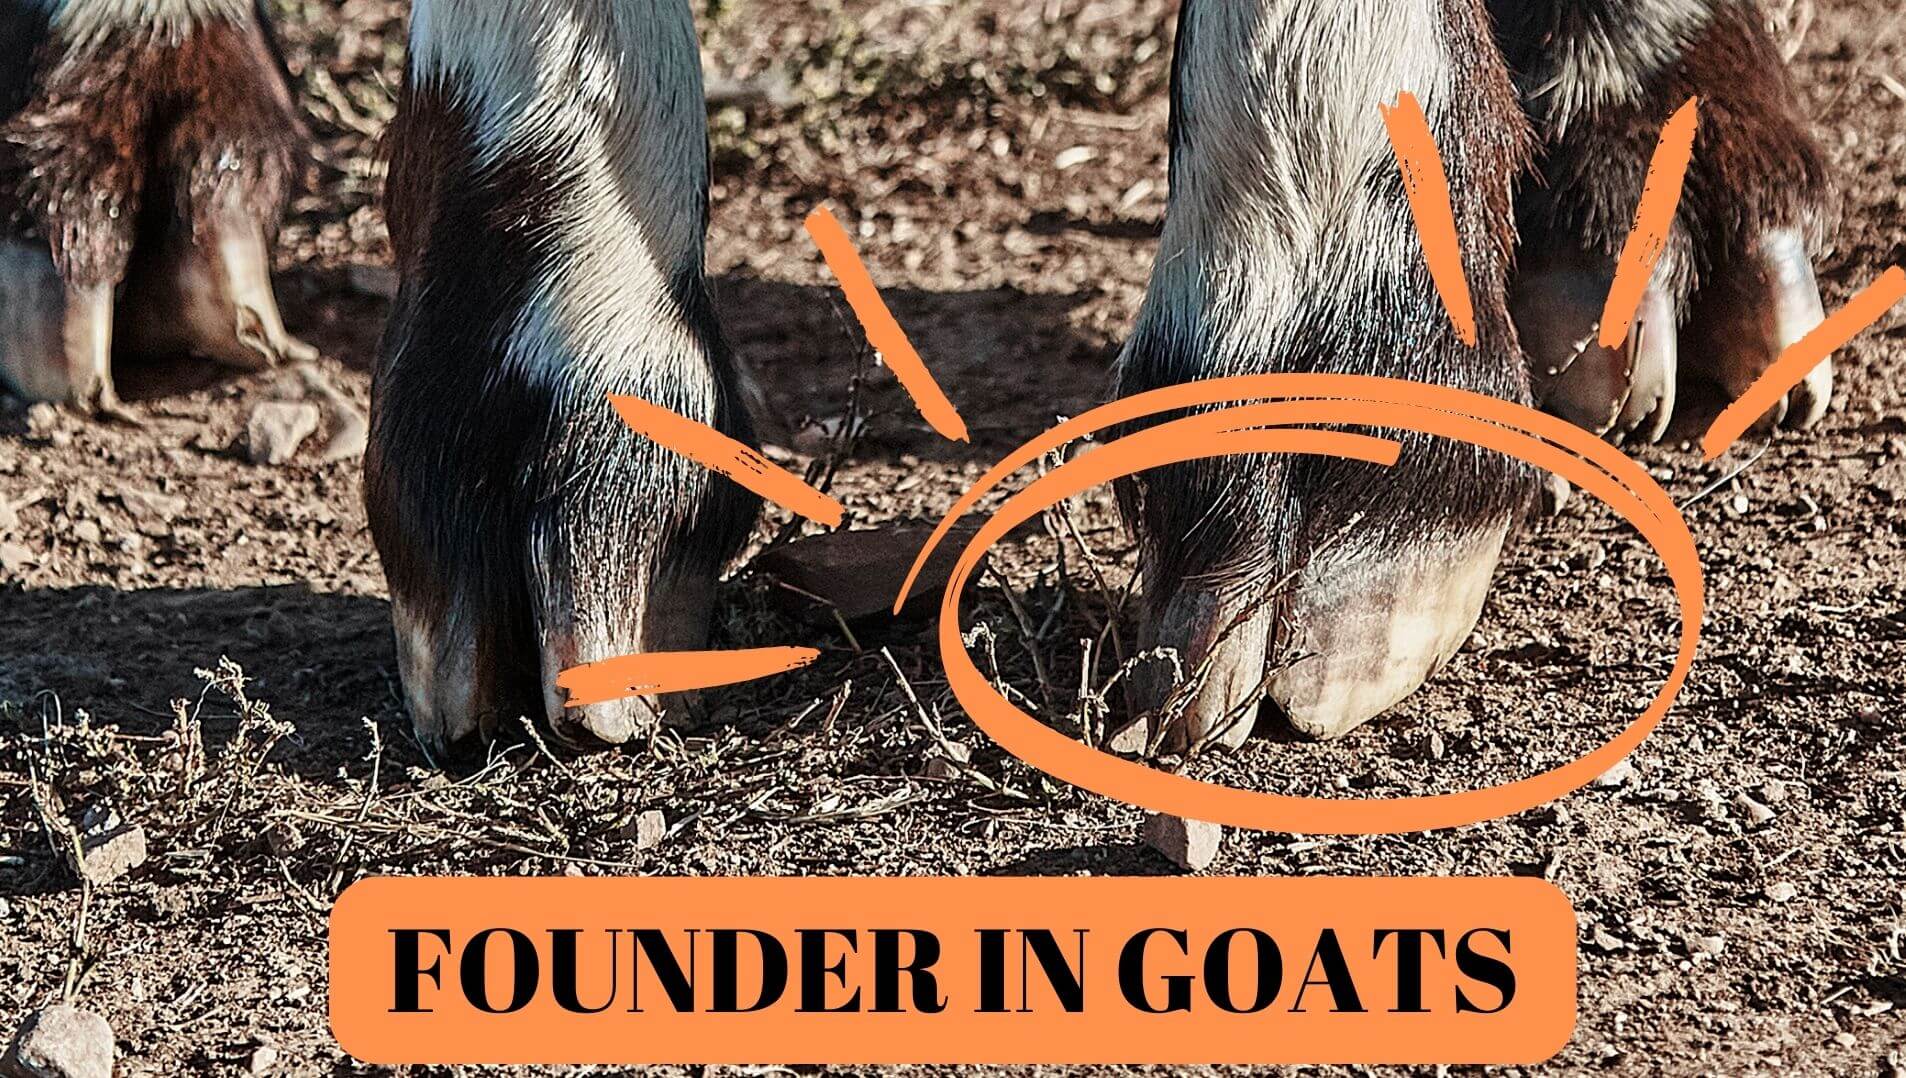 Lots of information about founder in goats